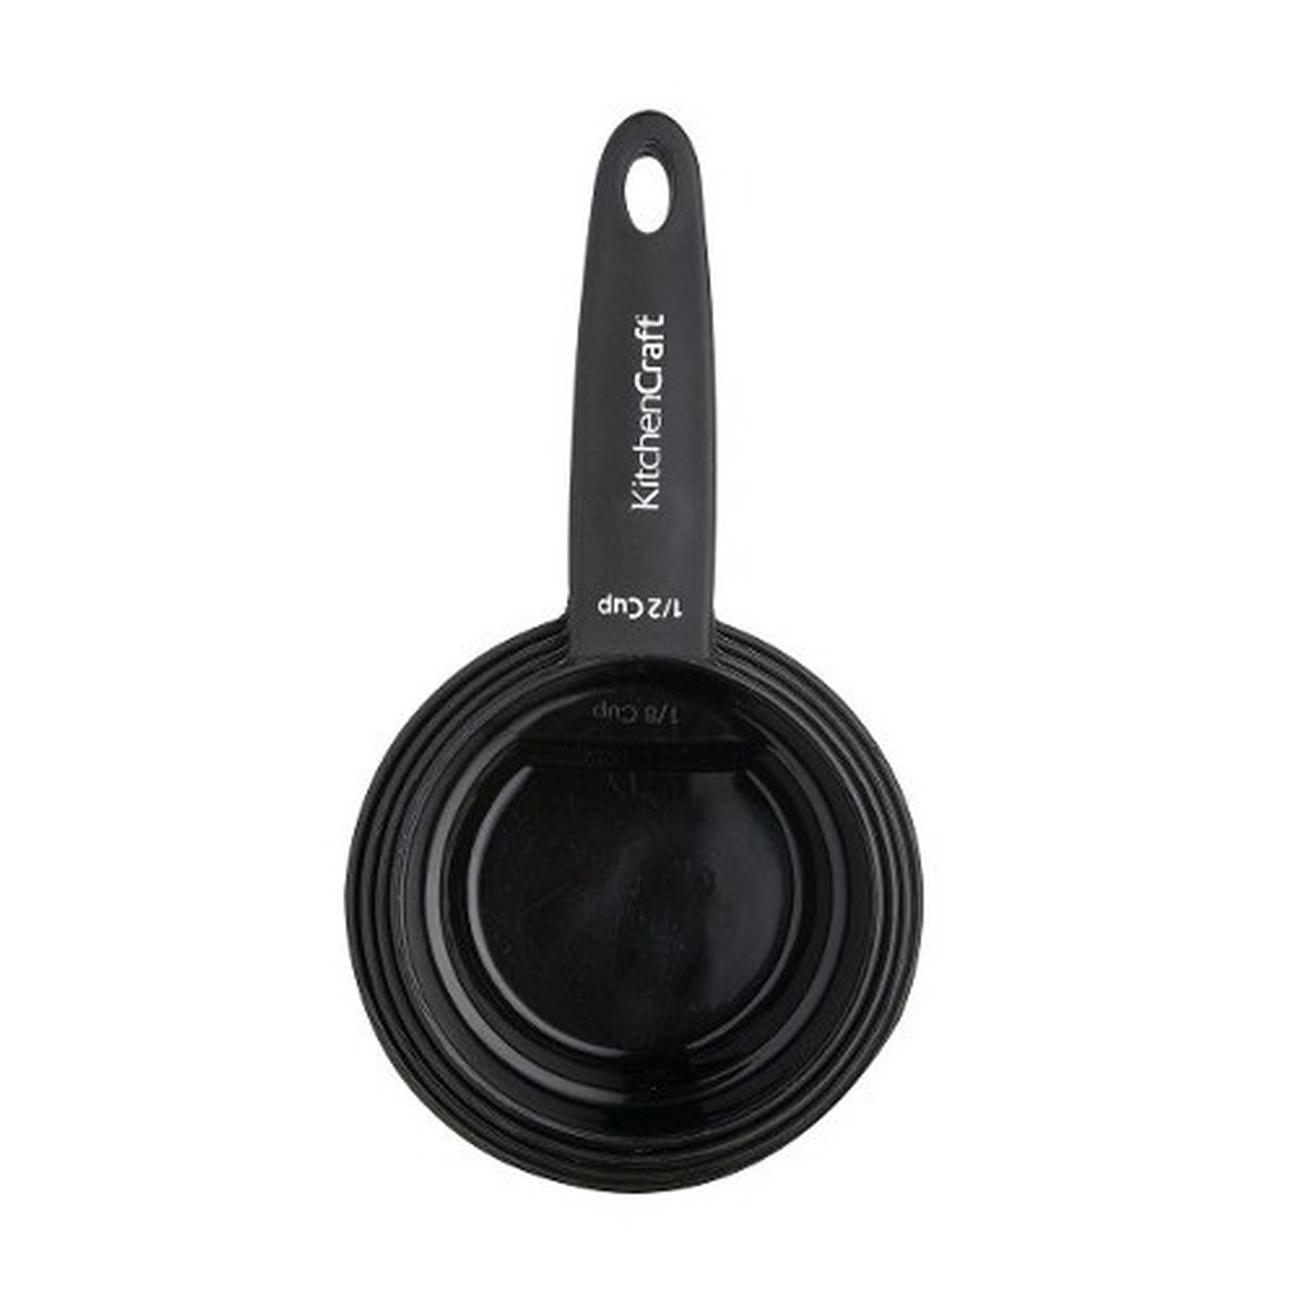 KitchenCraft Nesting Magnetic Set of 4 Measuring Cups Black 